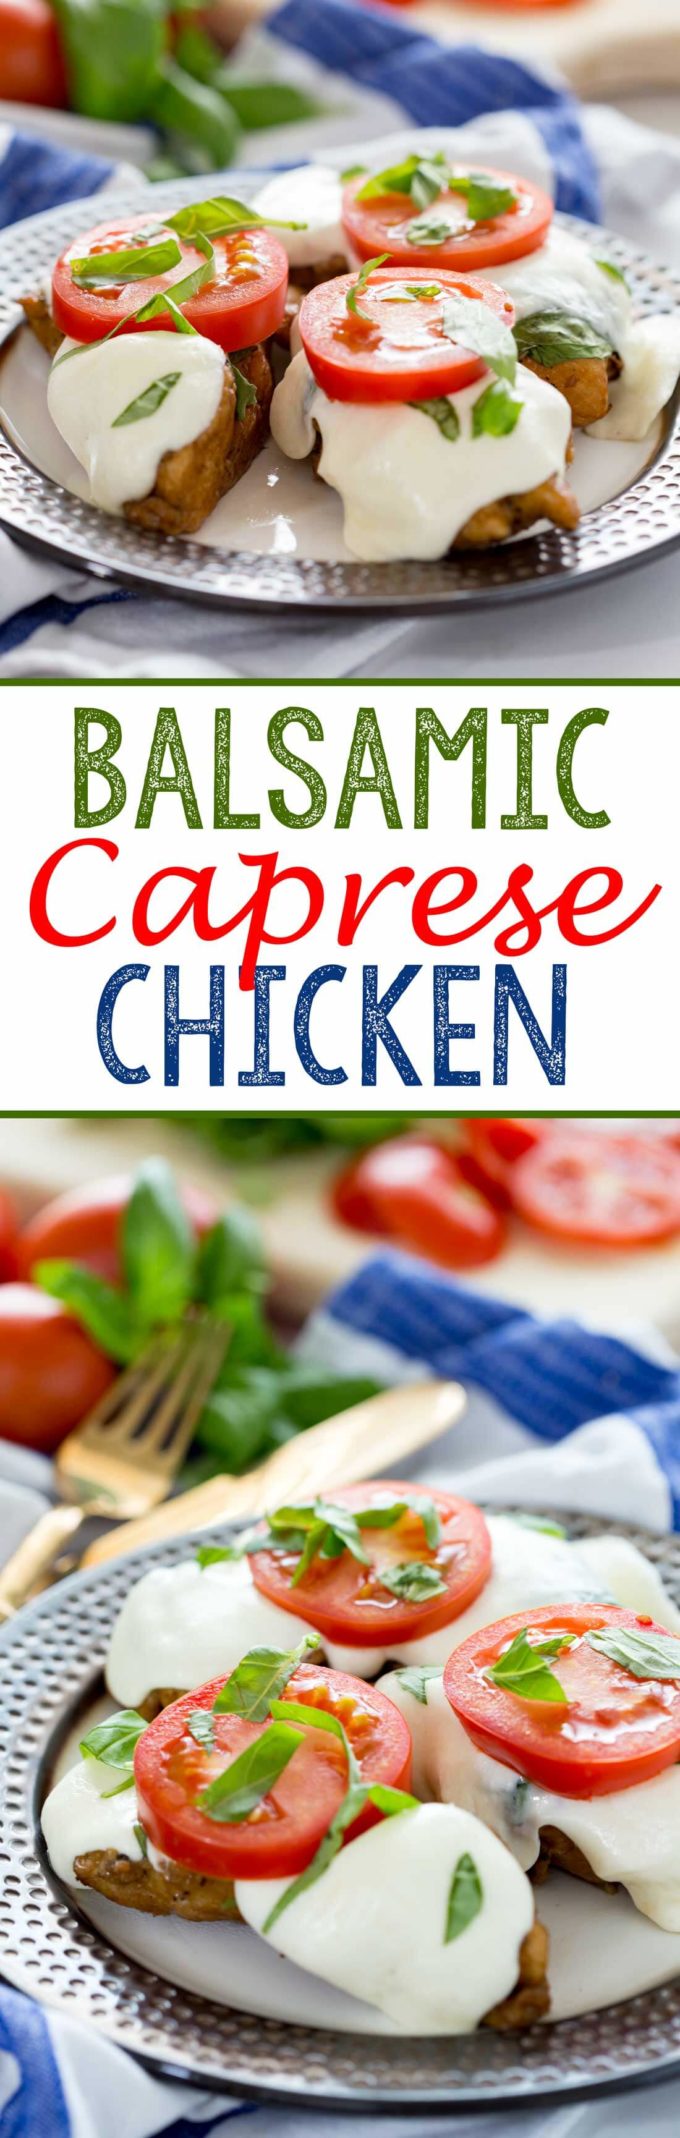 A layered balsamic chicken with a creamy layer of mozzarella, fresh basil, and tomatoes. 